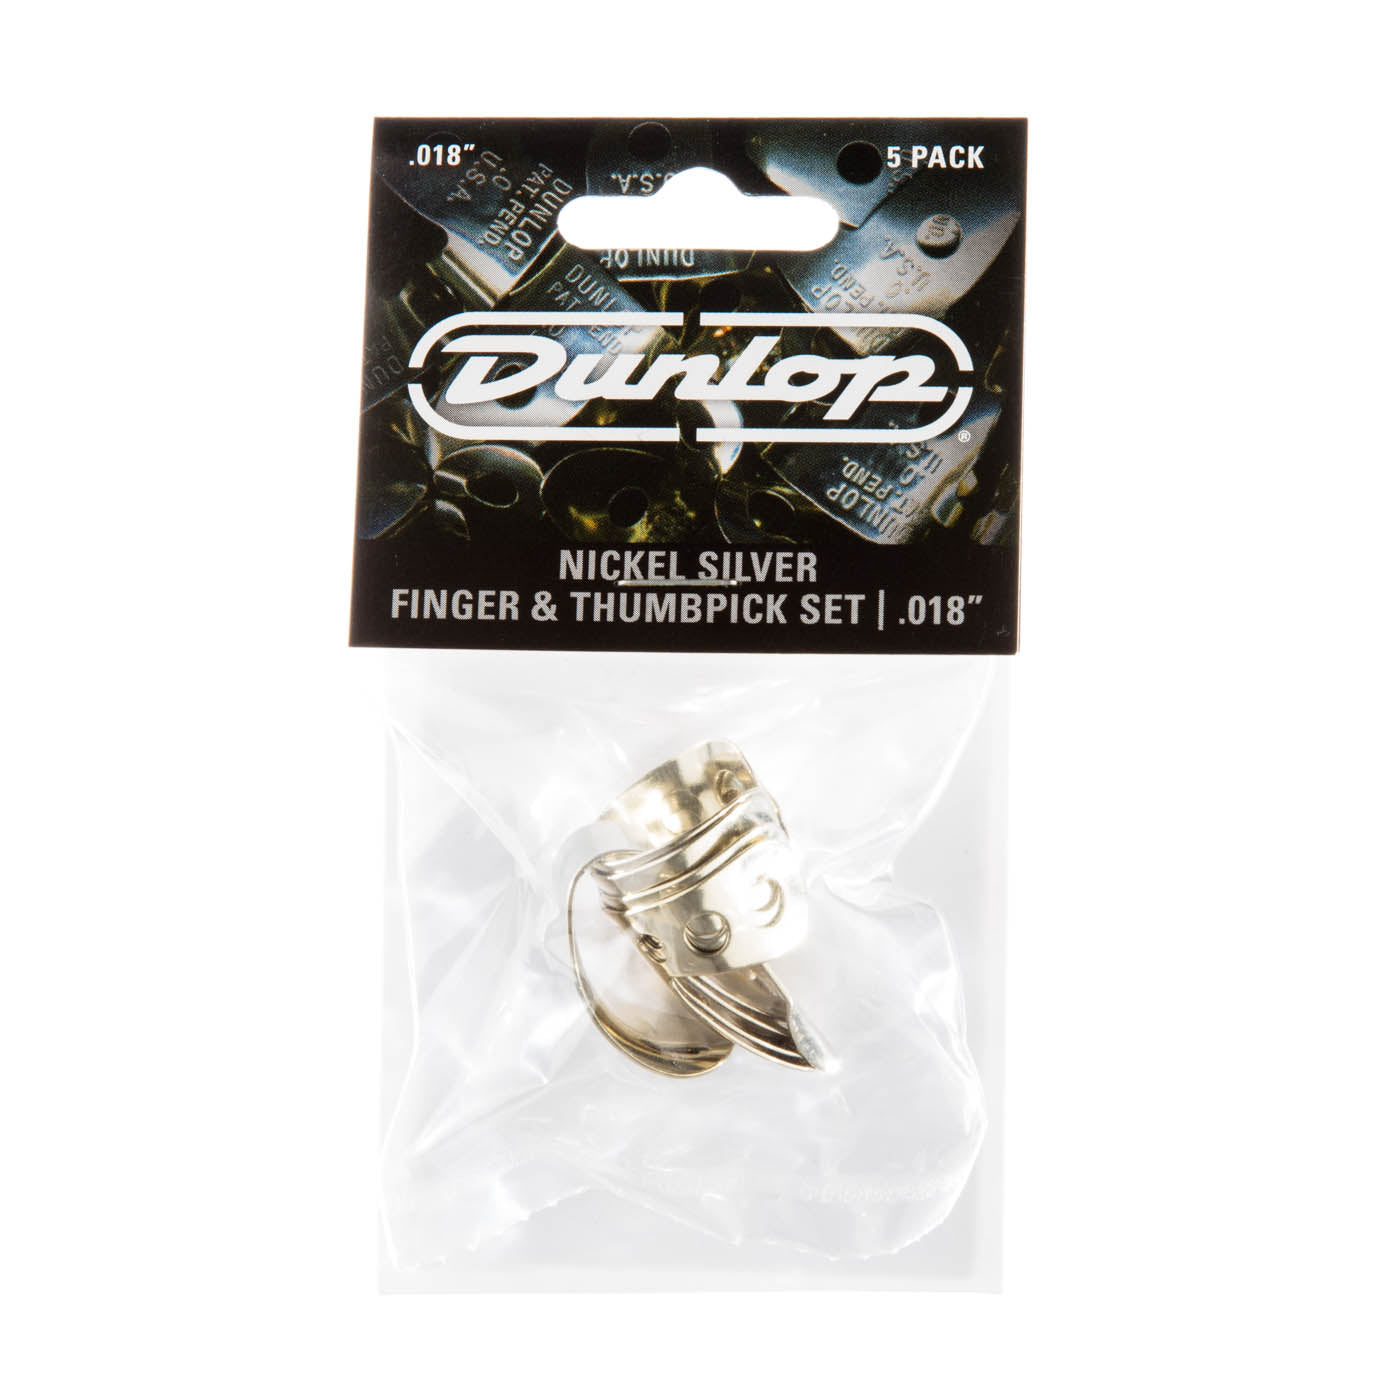 Dunlop Nickel Silver Finger and Thumbpicks - 5-pack